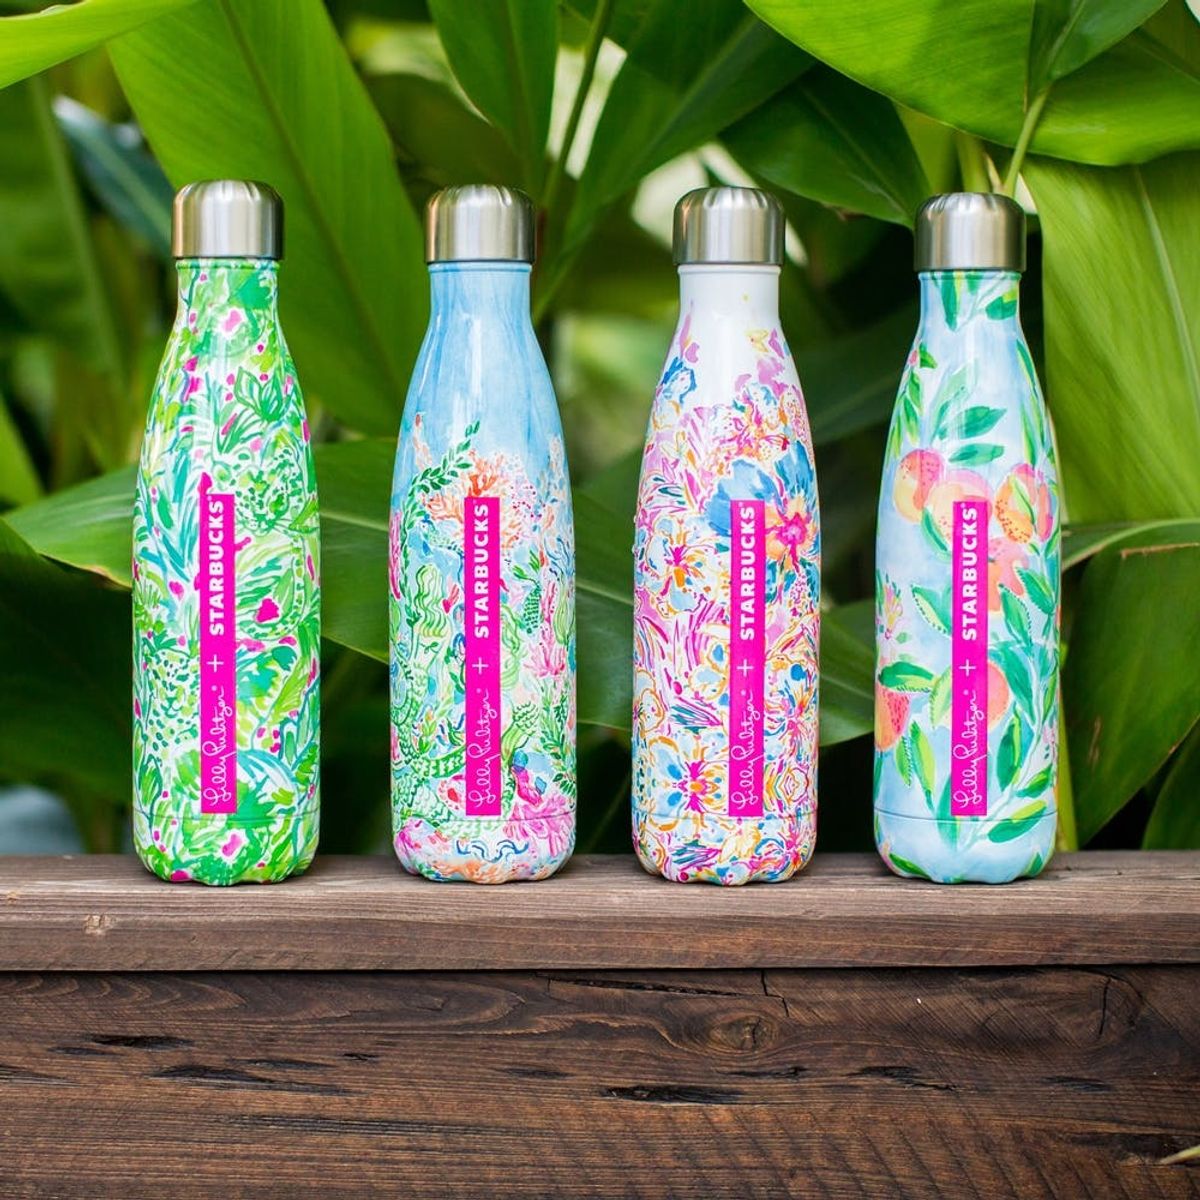 Lilly Pulitzer x Starbucks Teamed Up to Make the Prettiest Water Bottles